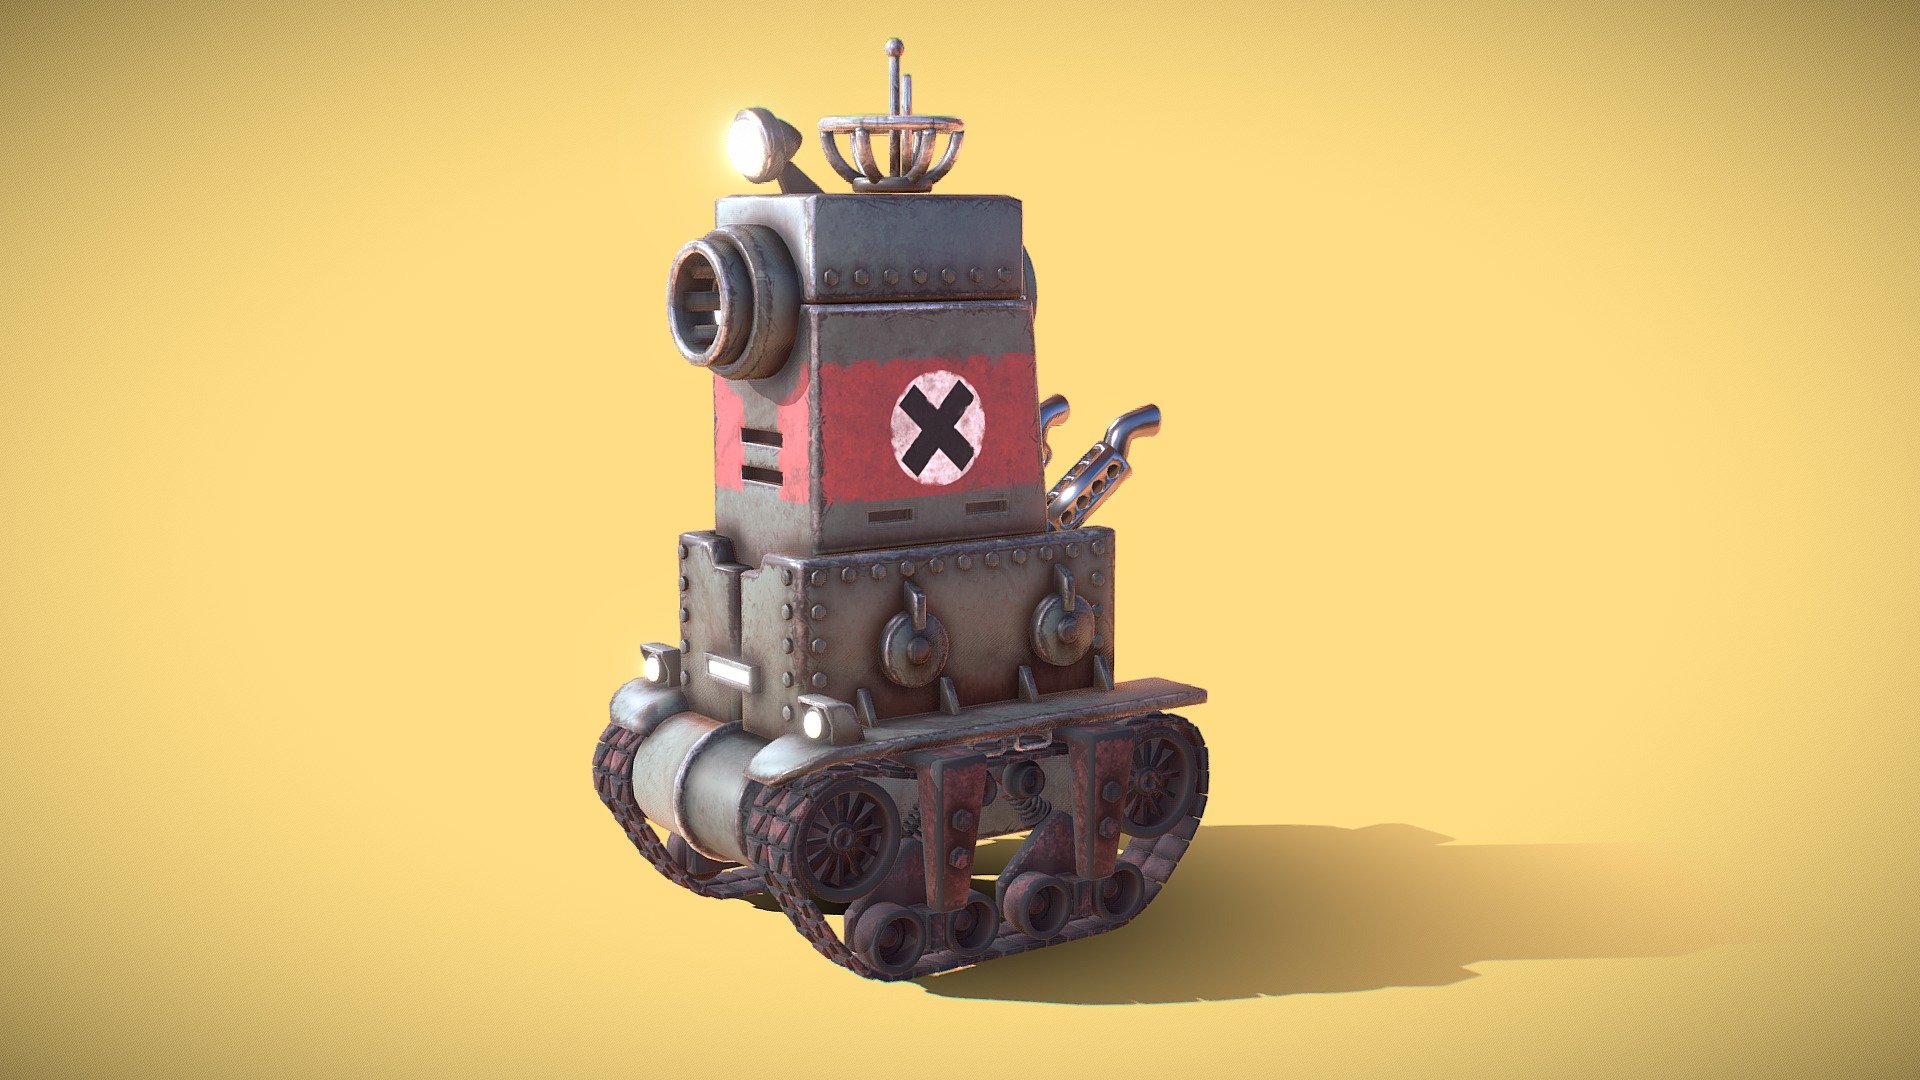 my rigging project
http://www.artstation.com/artwork/nop-03-sarubia

the inside would really be a mechanical that i cut it out for performance in sketchfab - Metal Slug - 3D model by Narasette 3d model